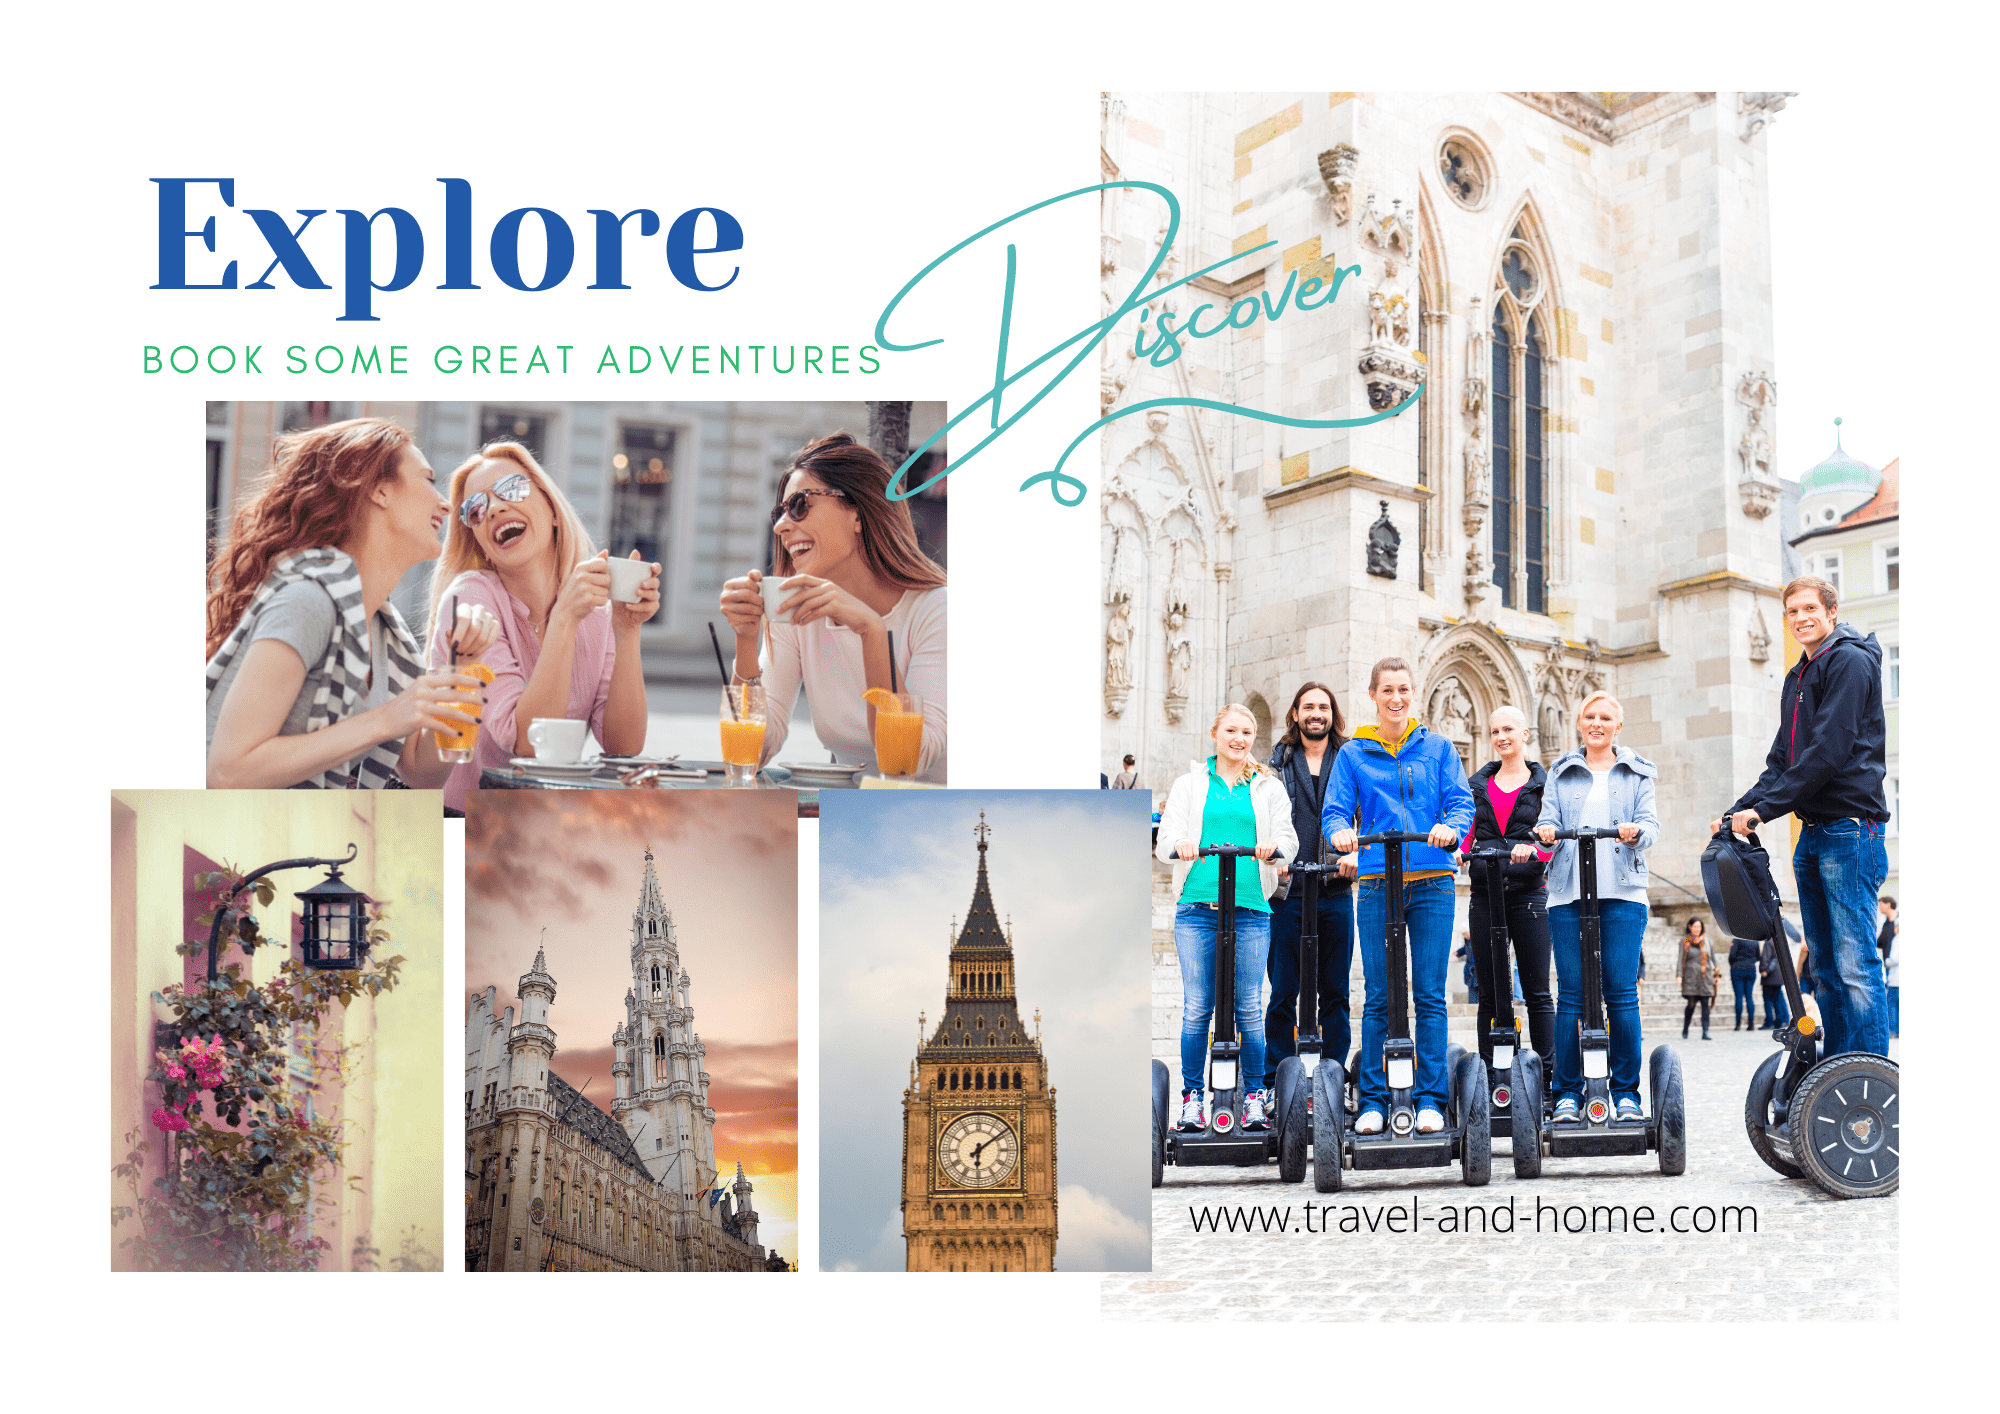 Book great adventures - drinking coffee in Paris, Segway tours, Big Ben, Italy, Cathedrals